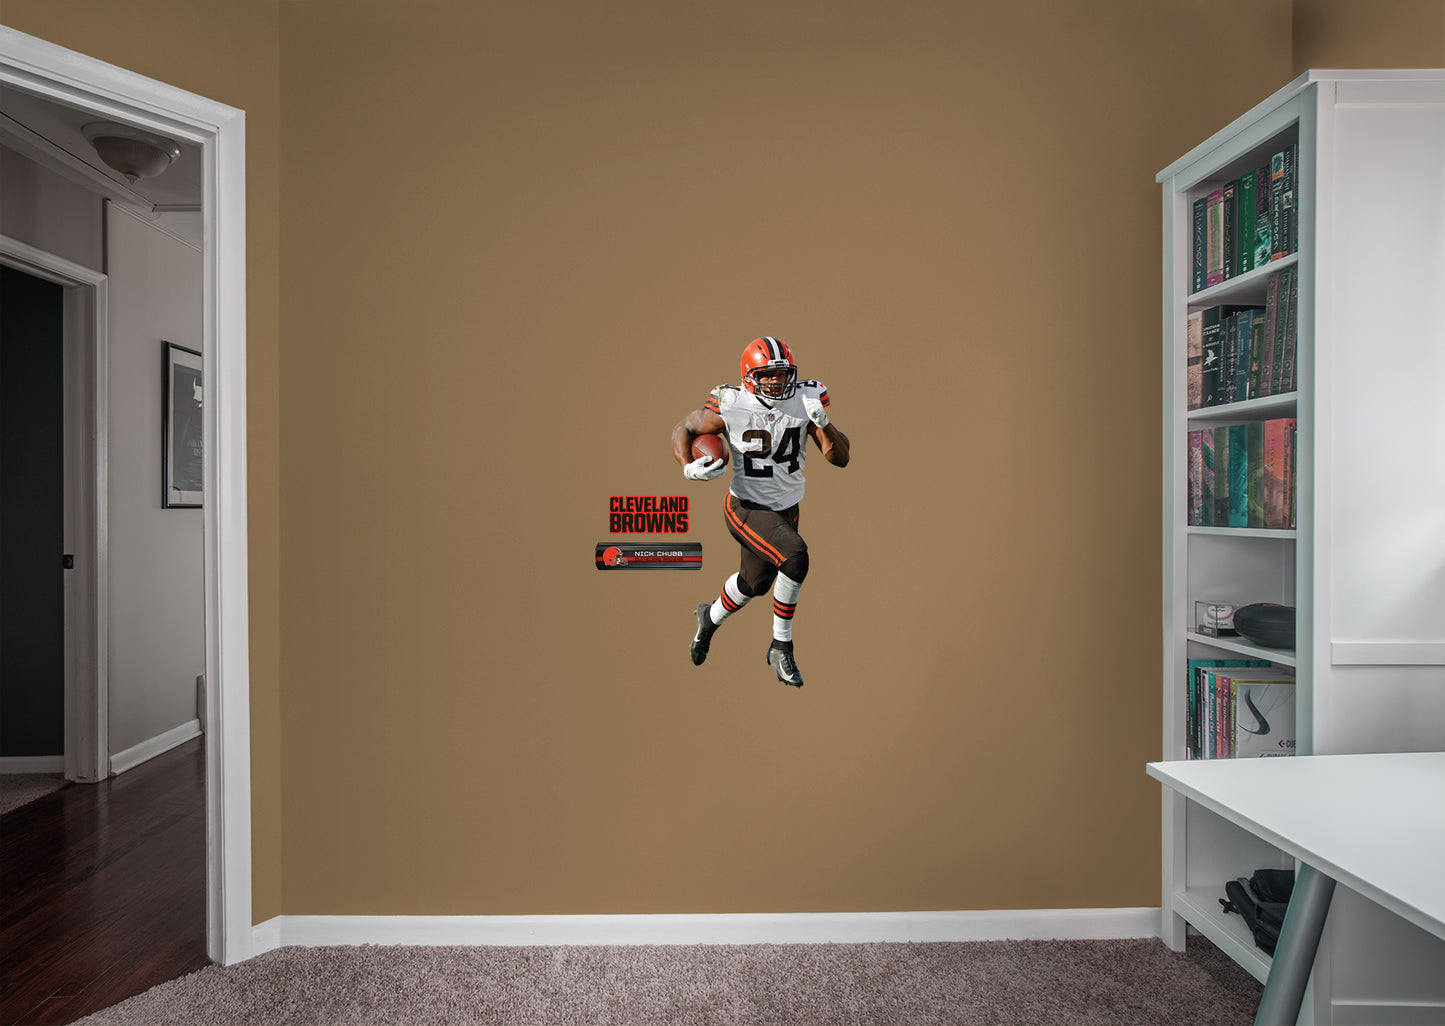 Cleveland Browns: Nick Chubb         - Officially Licensed NFL Removable Wall   Adhesive Decal